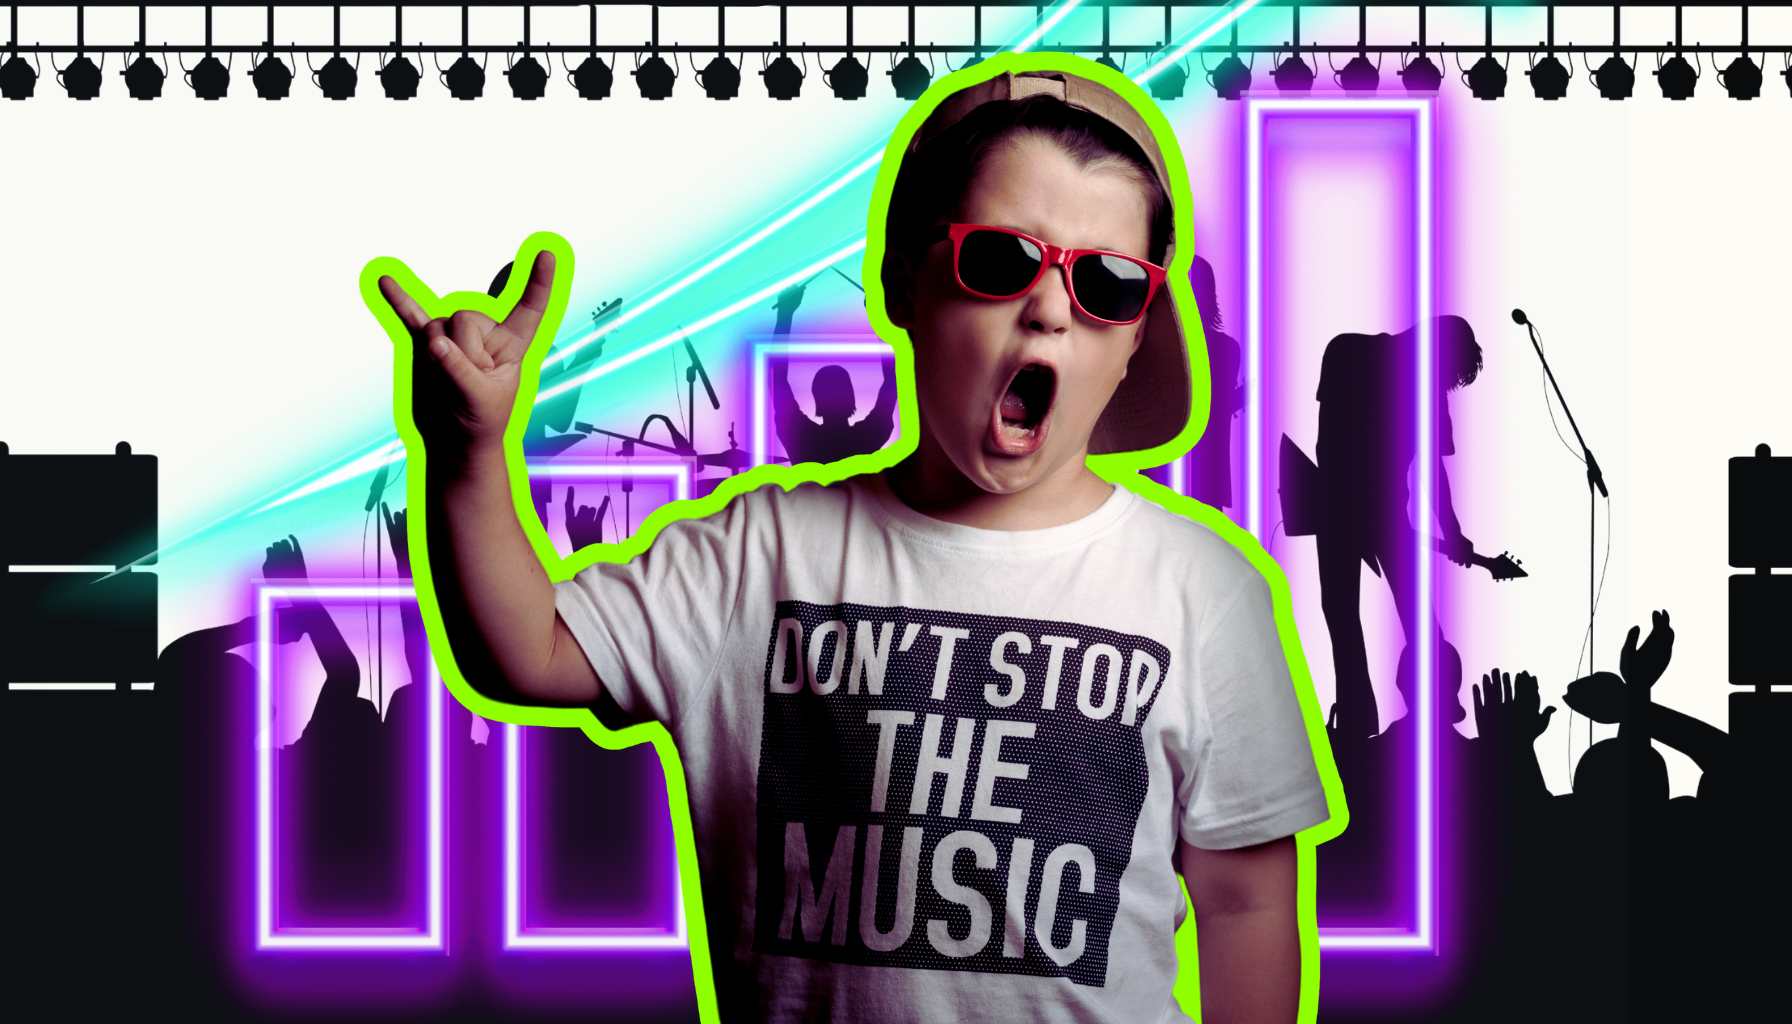 kid rocker with a can't stop the music t-shirt holding up rock on fingers in front of a silhouette rock band performing on stage